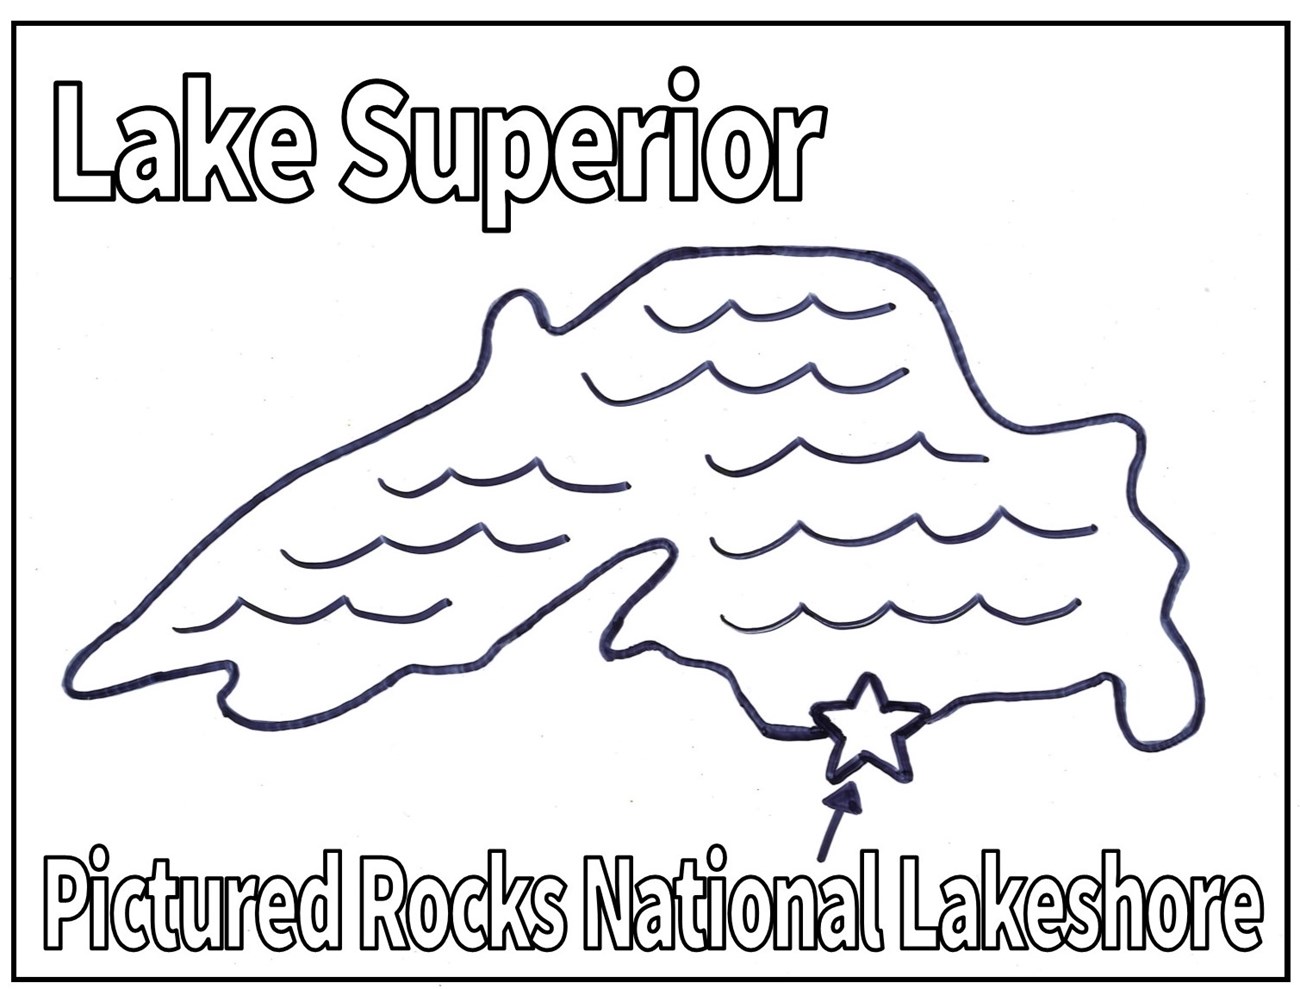 Outline of Lake Superior surrounded by the words Lake Superior, Pictured Rocks National Lakeshore with a star at the bottom right showing the location of Pictured Rocks National Lakeshore.